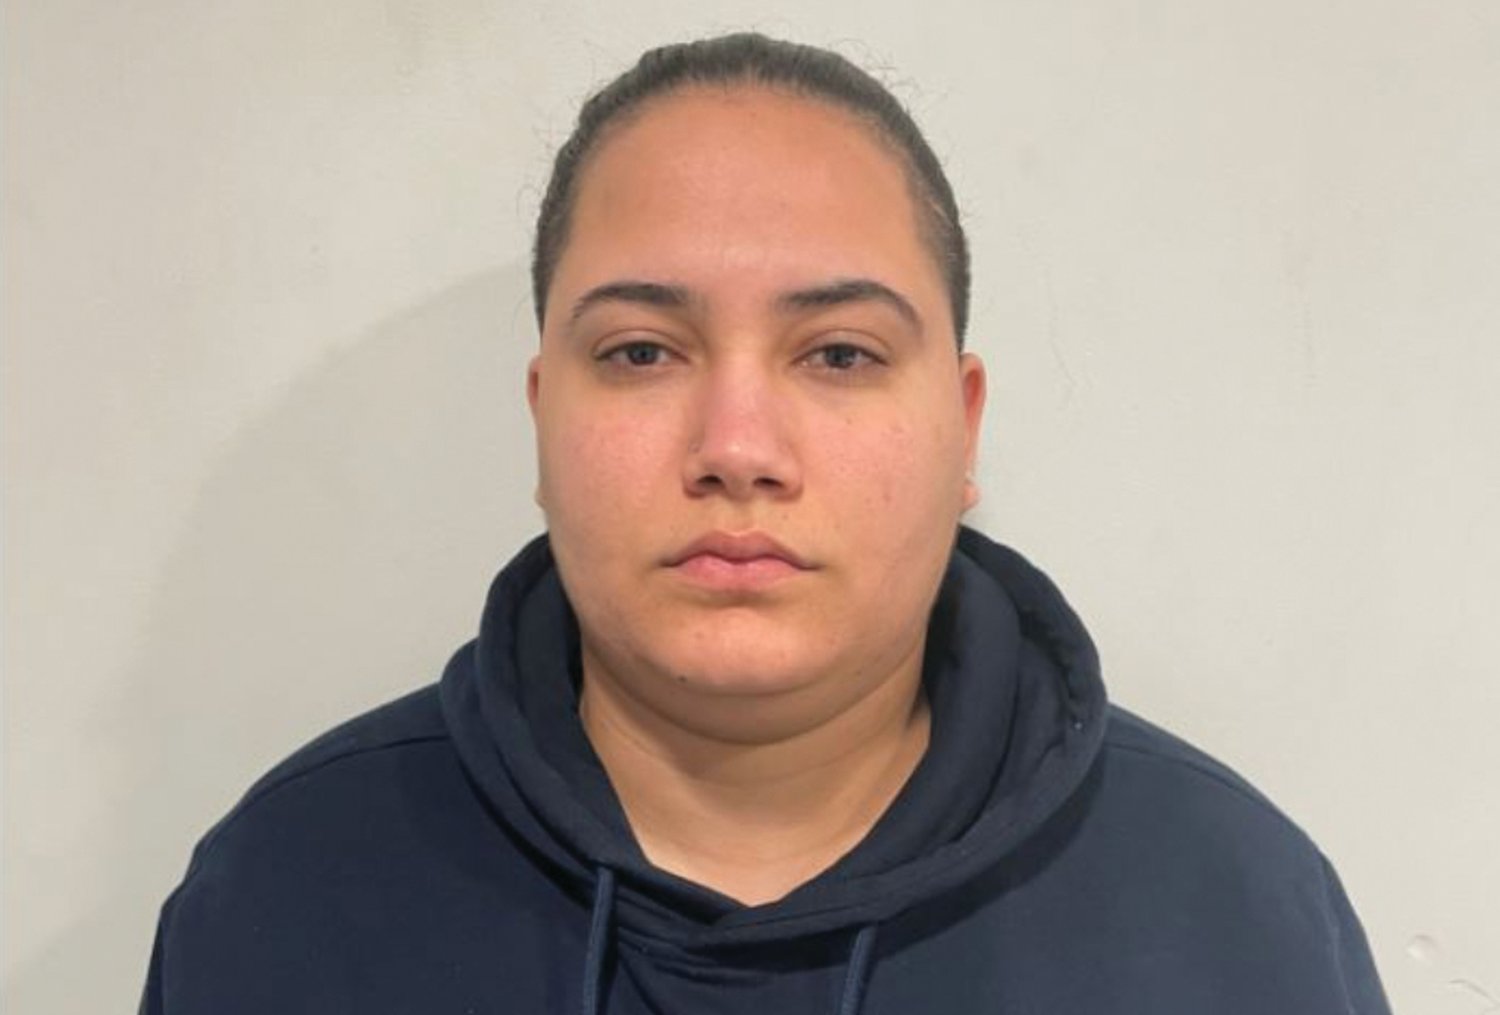 Angel Camilo, Miguel Jimenez Cruz and Luz Jimenez Regalado were arrested following a High Intensity Drug Trafficking Area (HIDTA) Task Force investigation in Cranston and Providence.